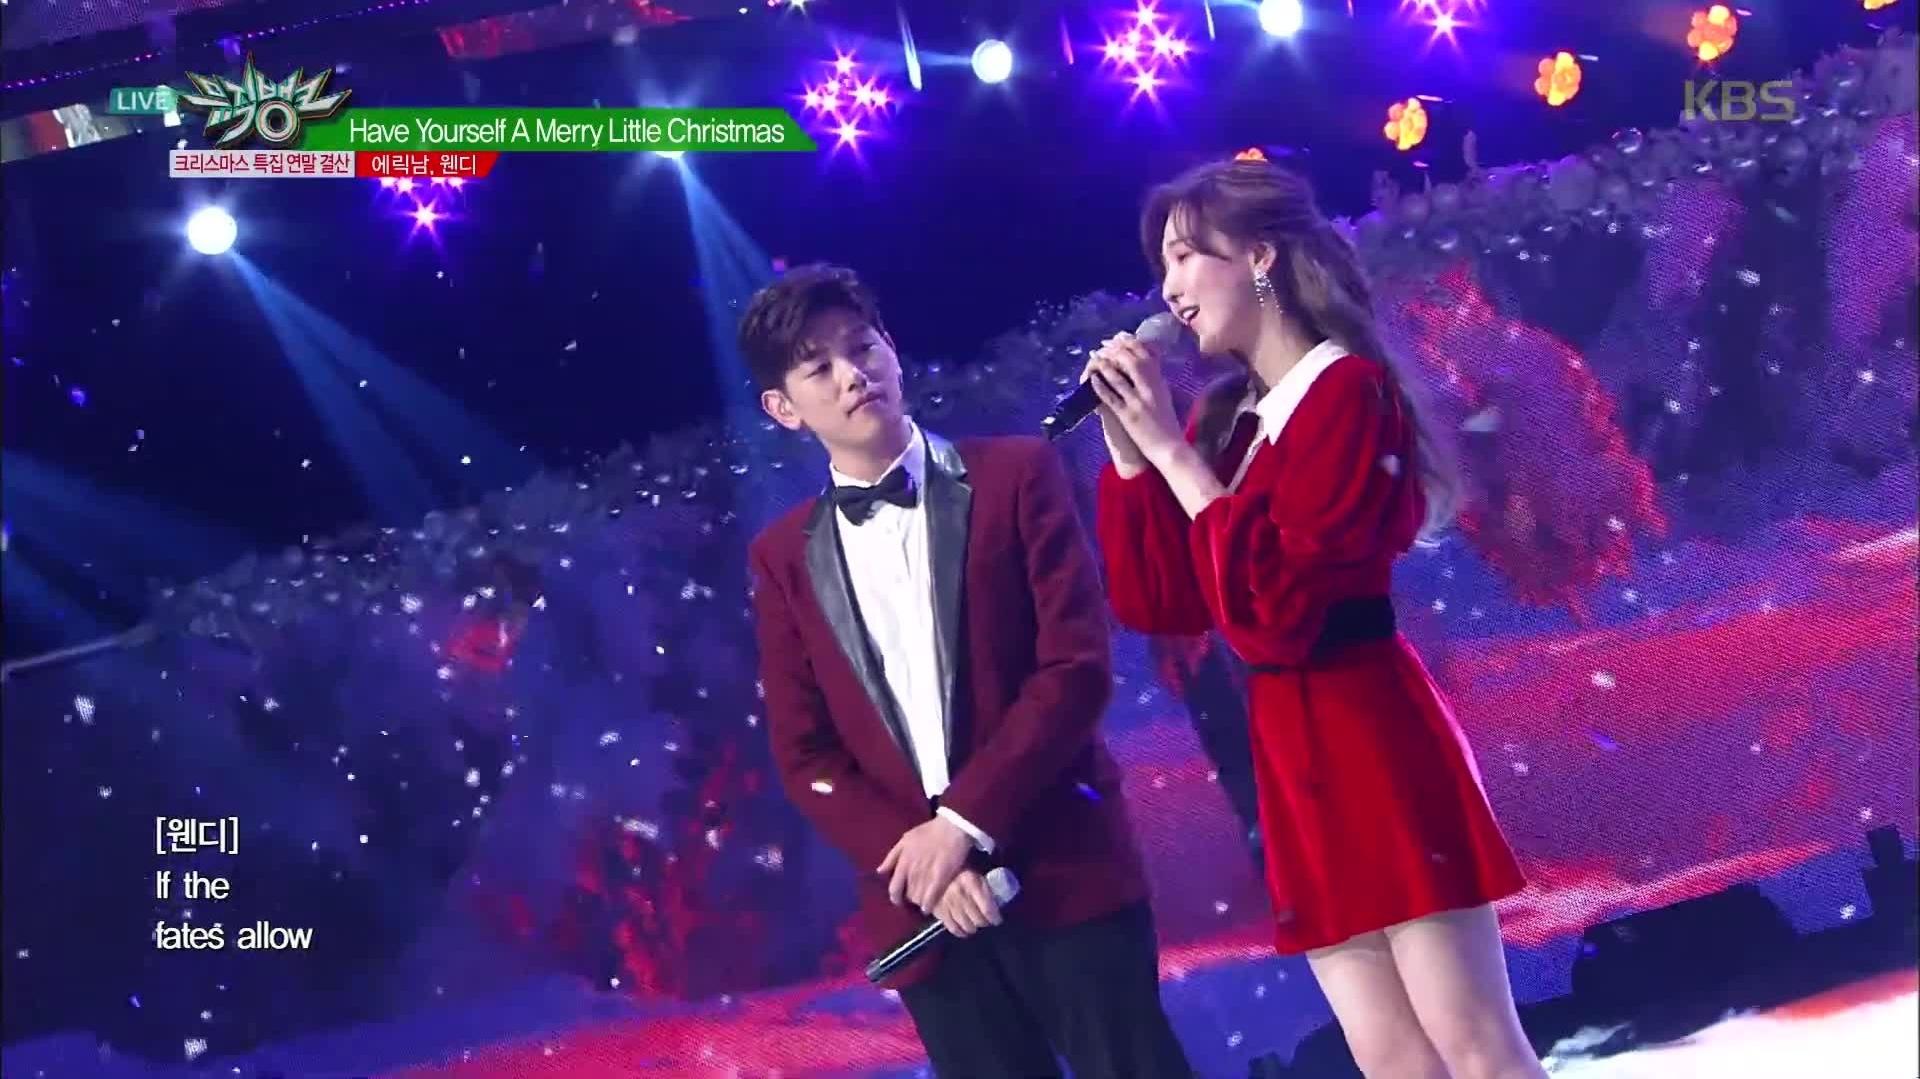 Eric Nam - Have Yourself A Merry Little Christmas | KBS音乐银行 181221 现场版